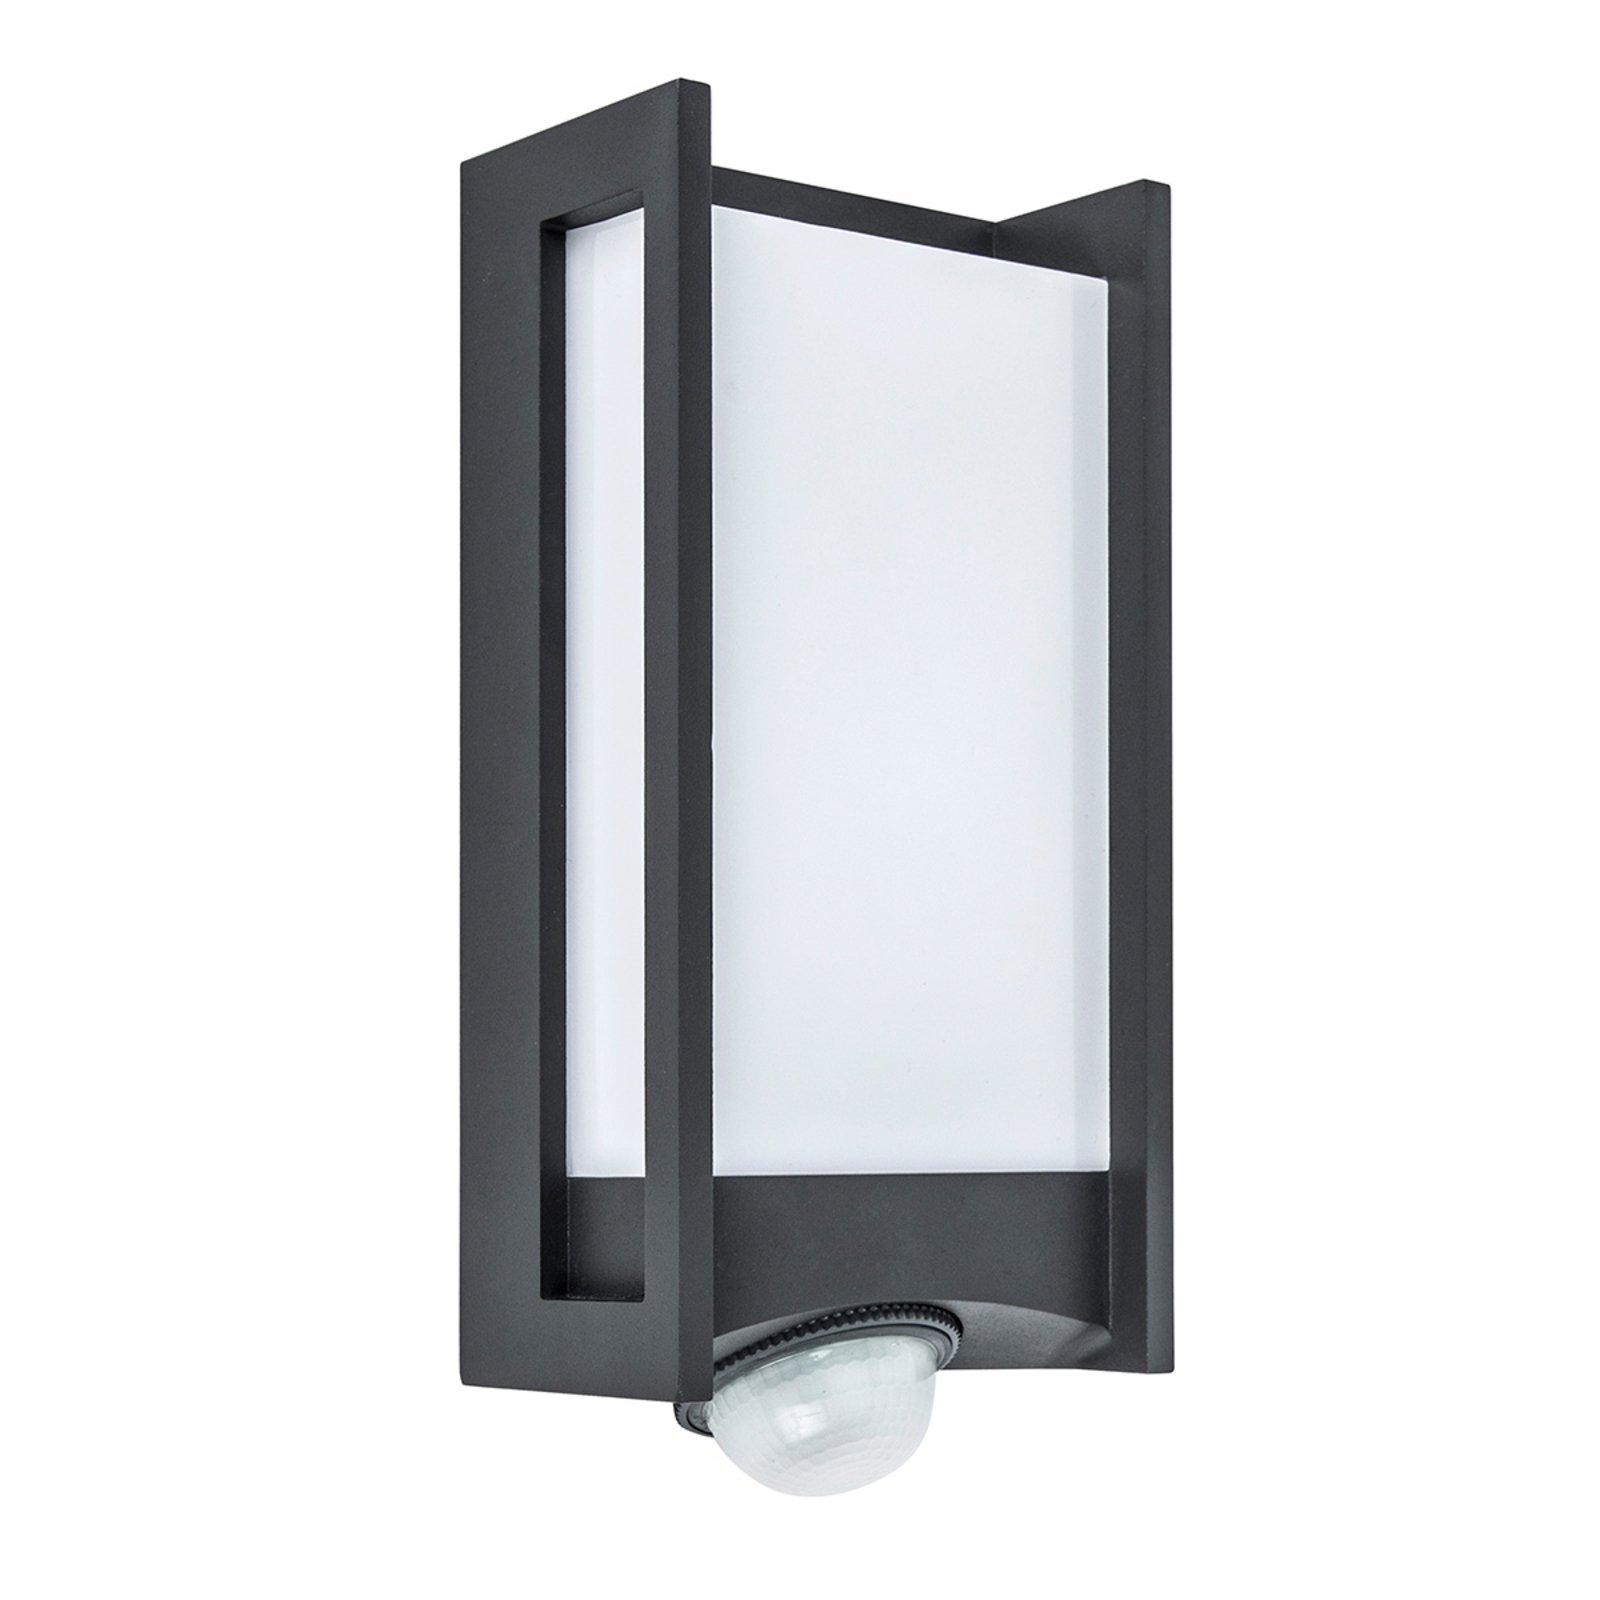 Qubo LED outdoor wall light with motion detector